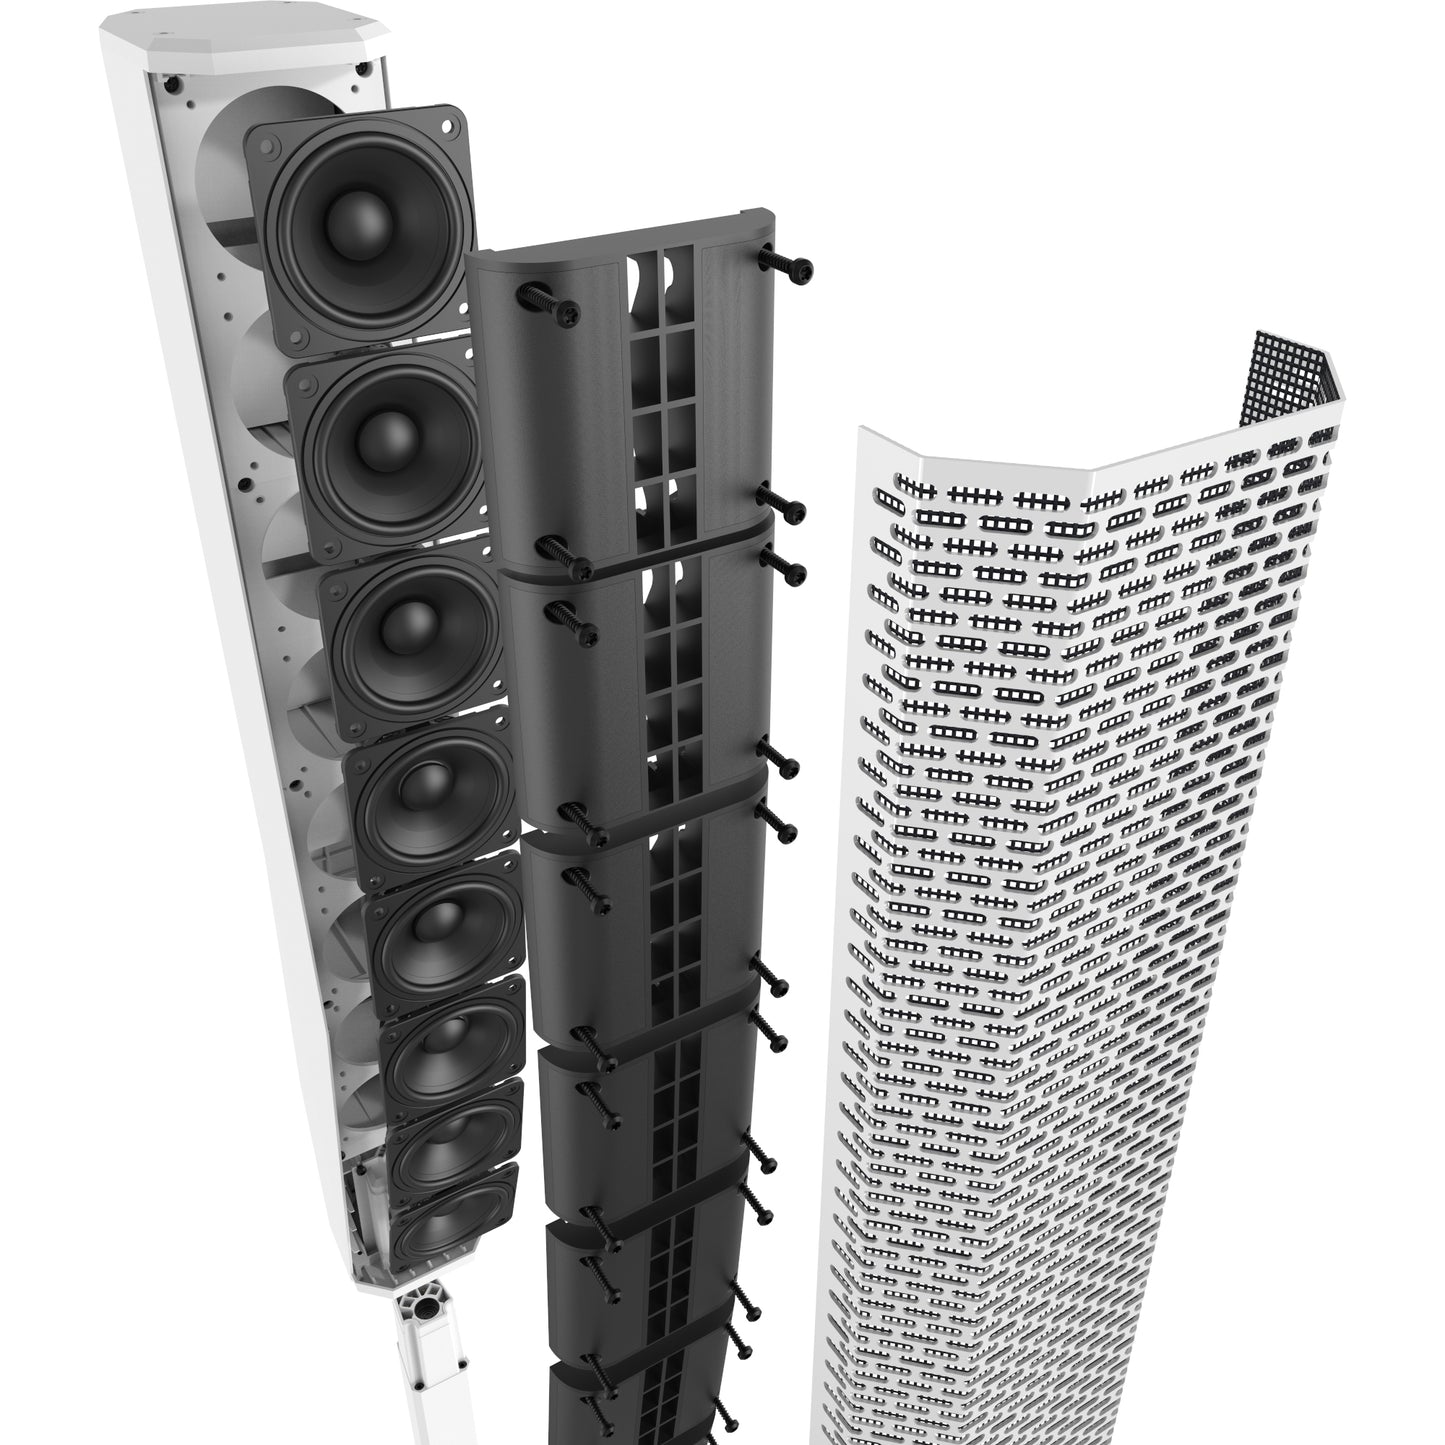 Electro-Voice EVOLVE 50 tragbares Line-Array-PA-System